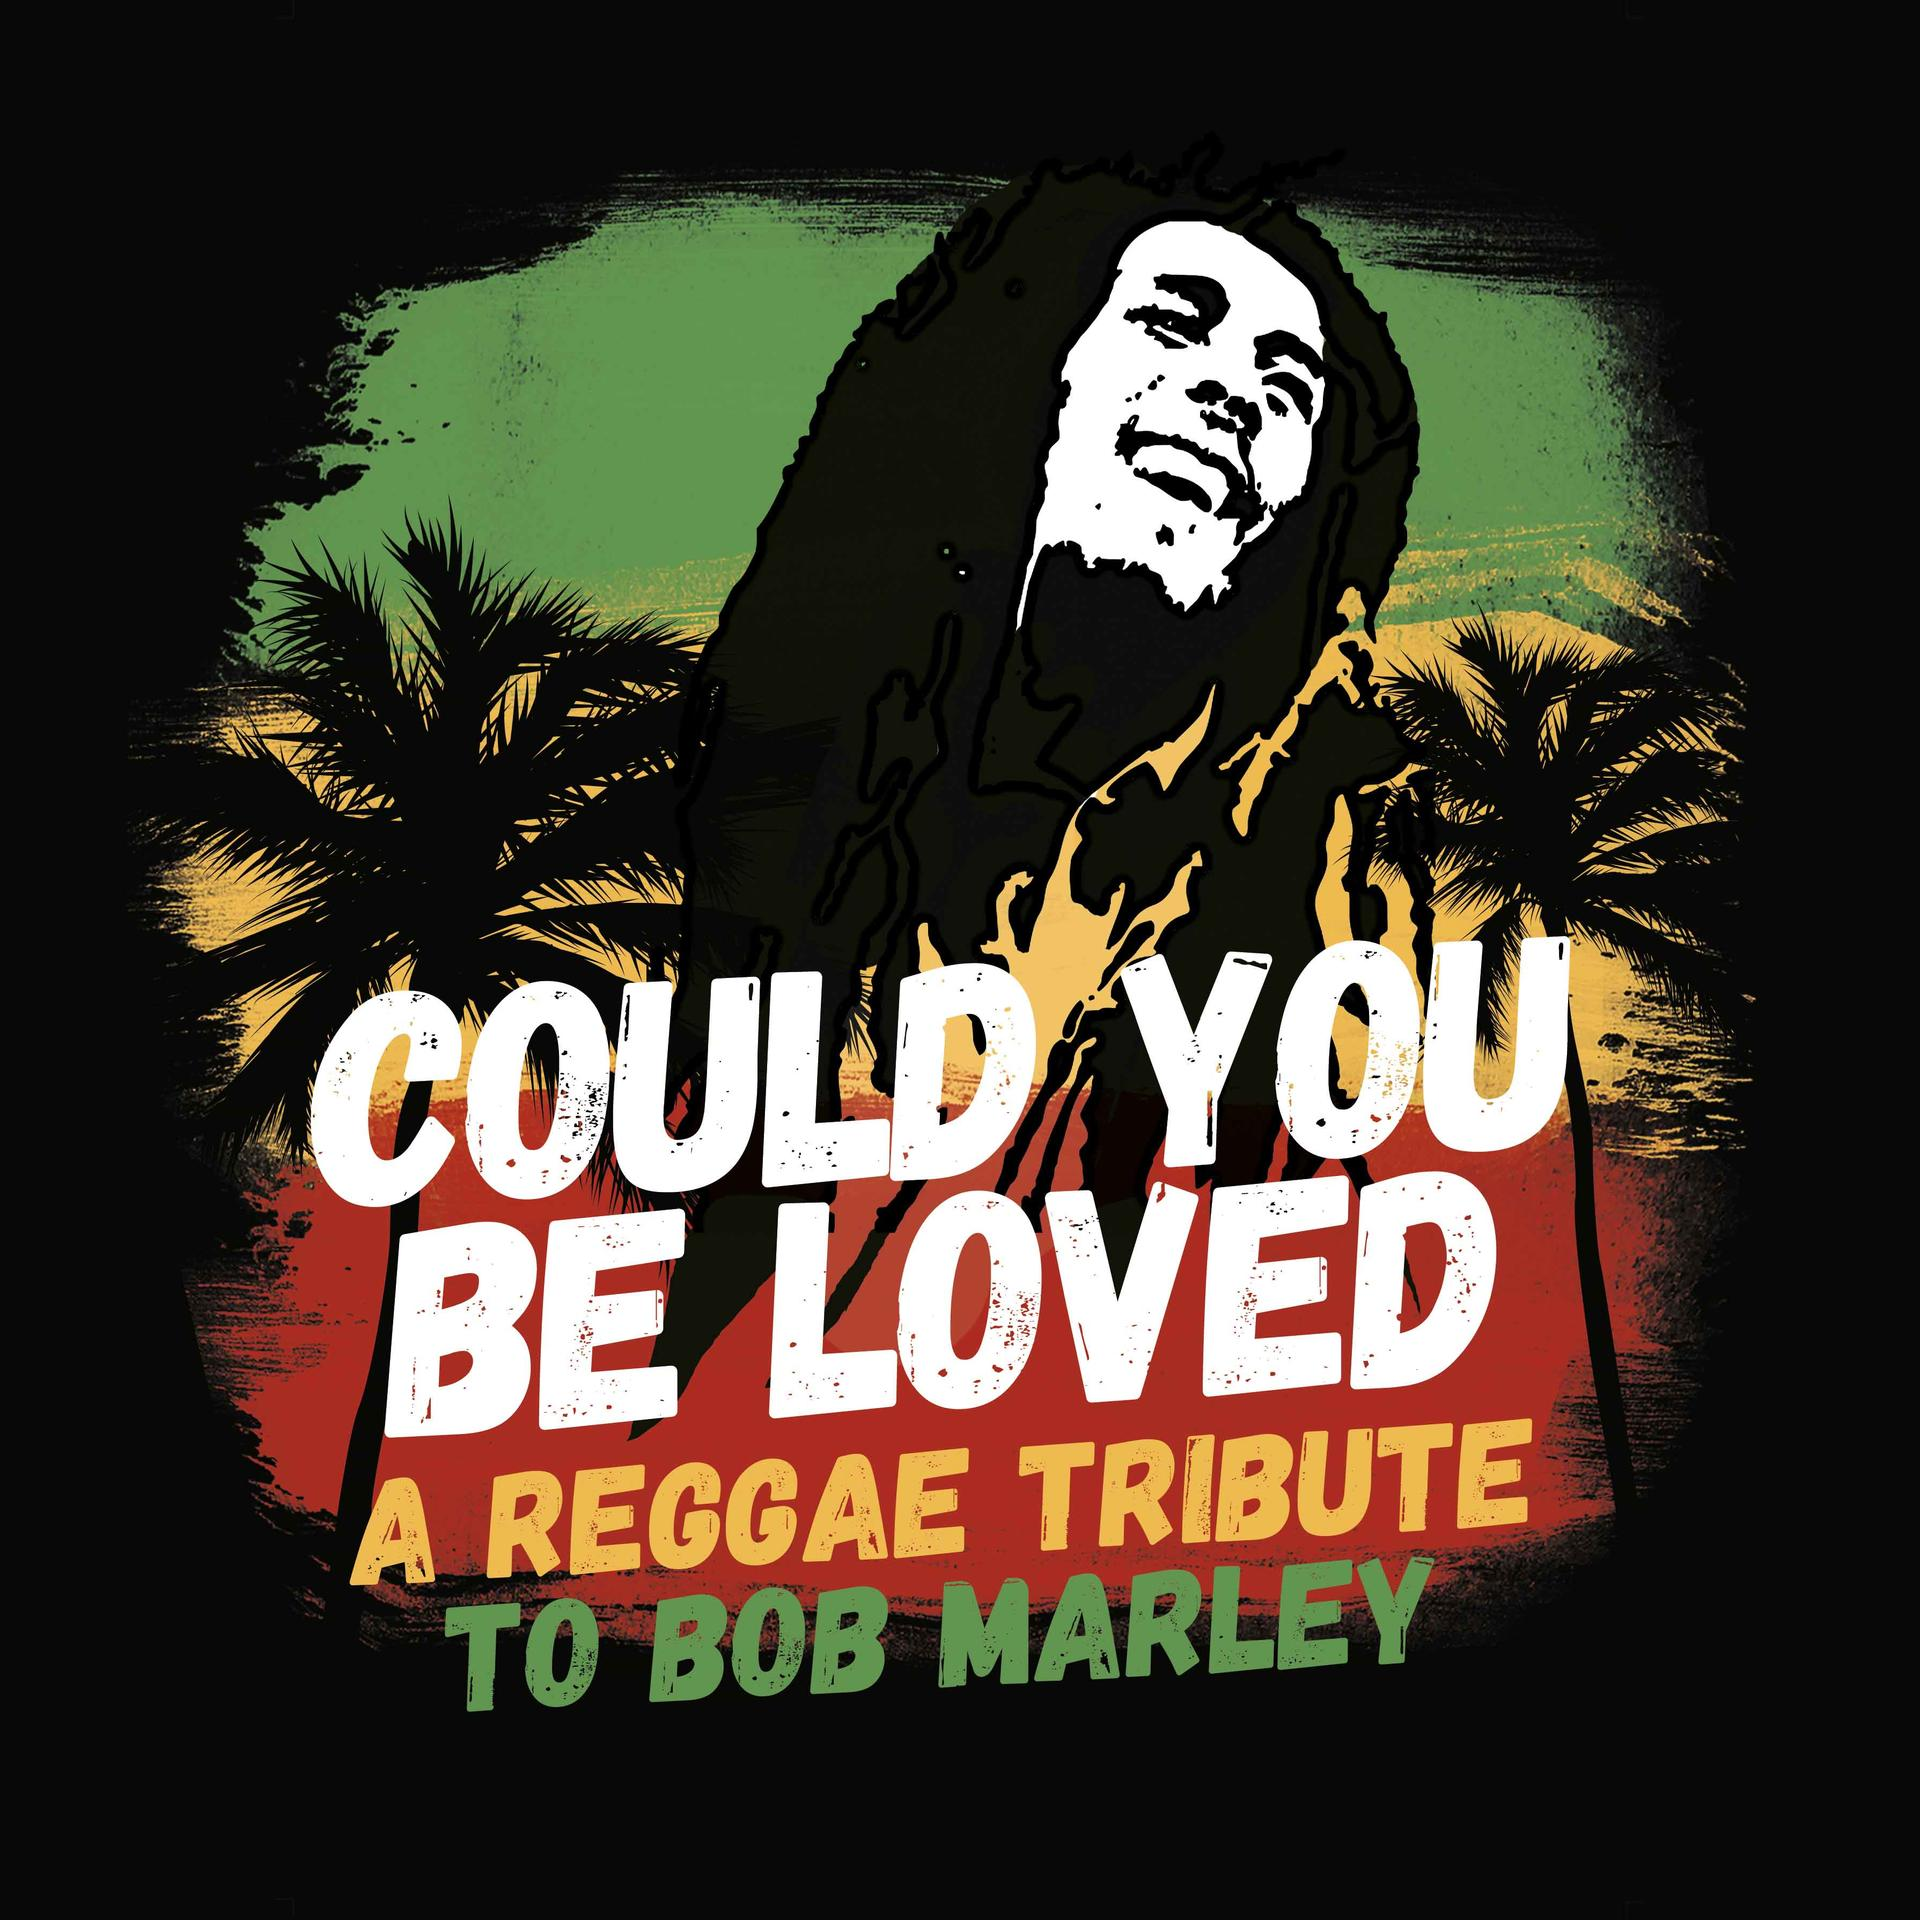 VARIOUS - Could Tribute Loved Be - (LP/Green) Marley (Vinyl) Bob You To 